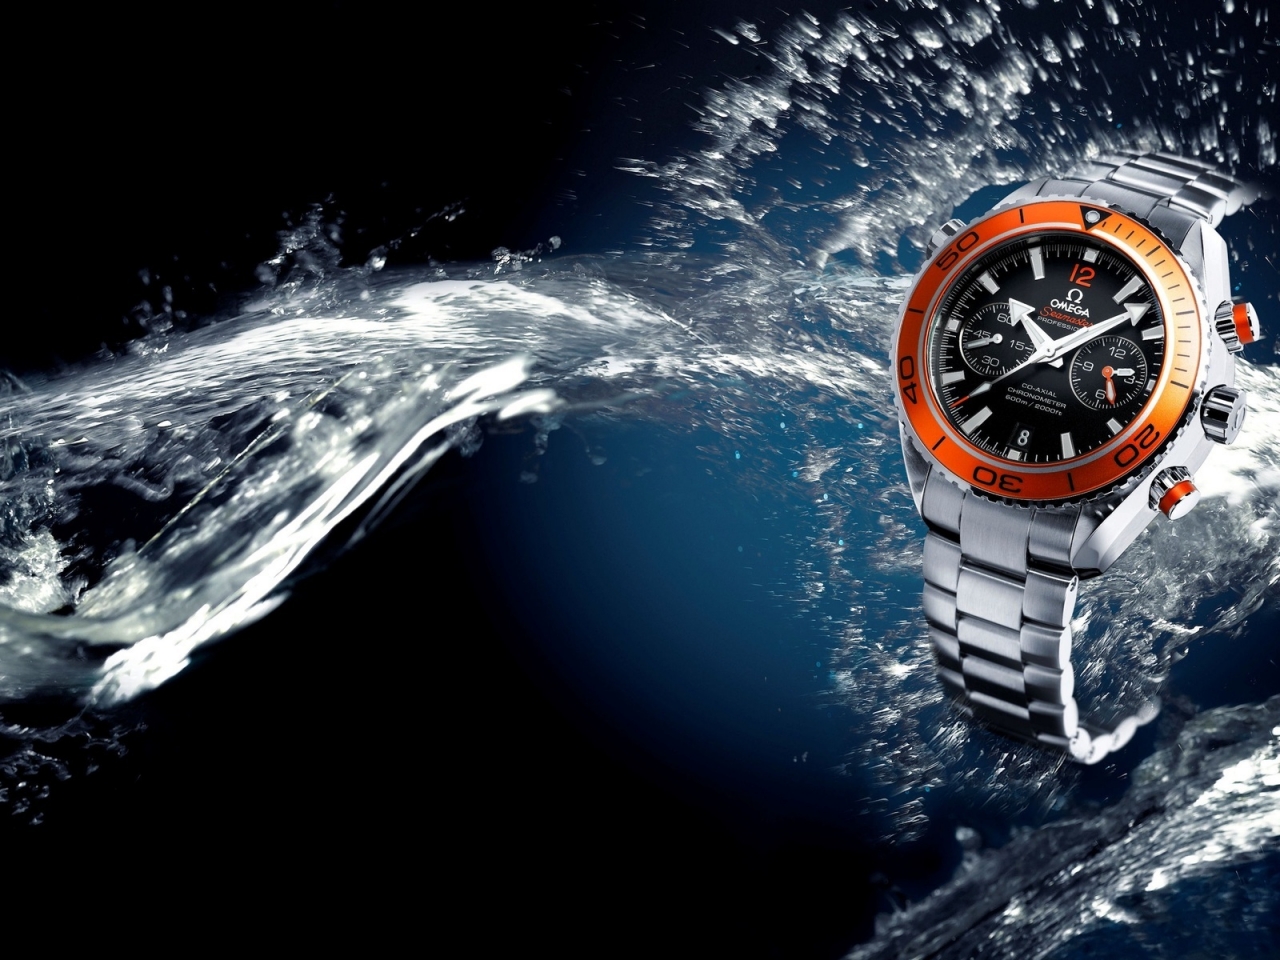 Omega Seamaster Watch for 1280 x 960 resolution